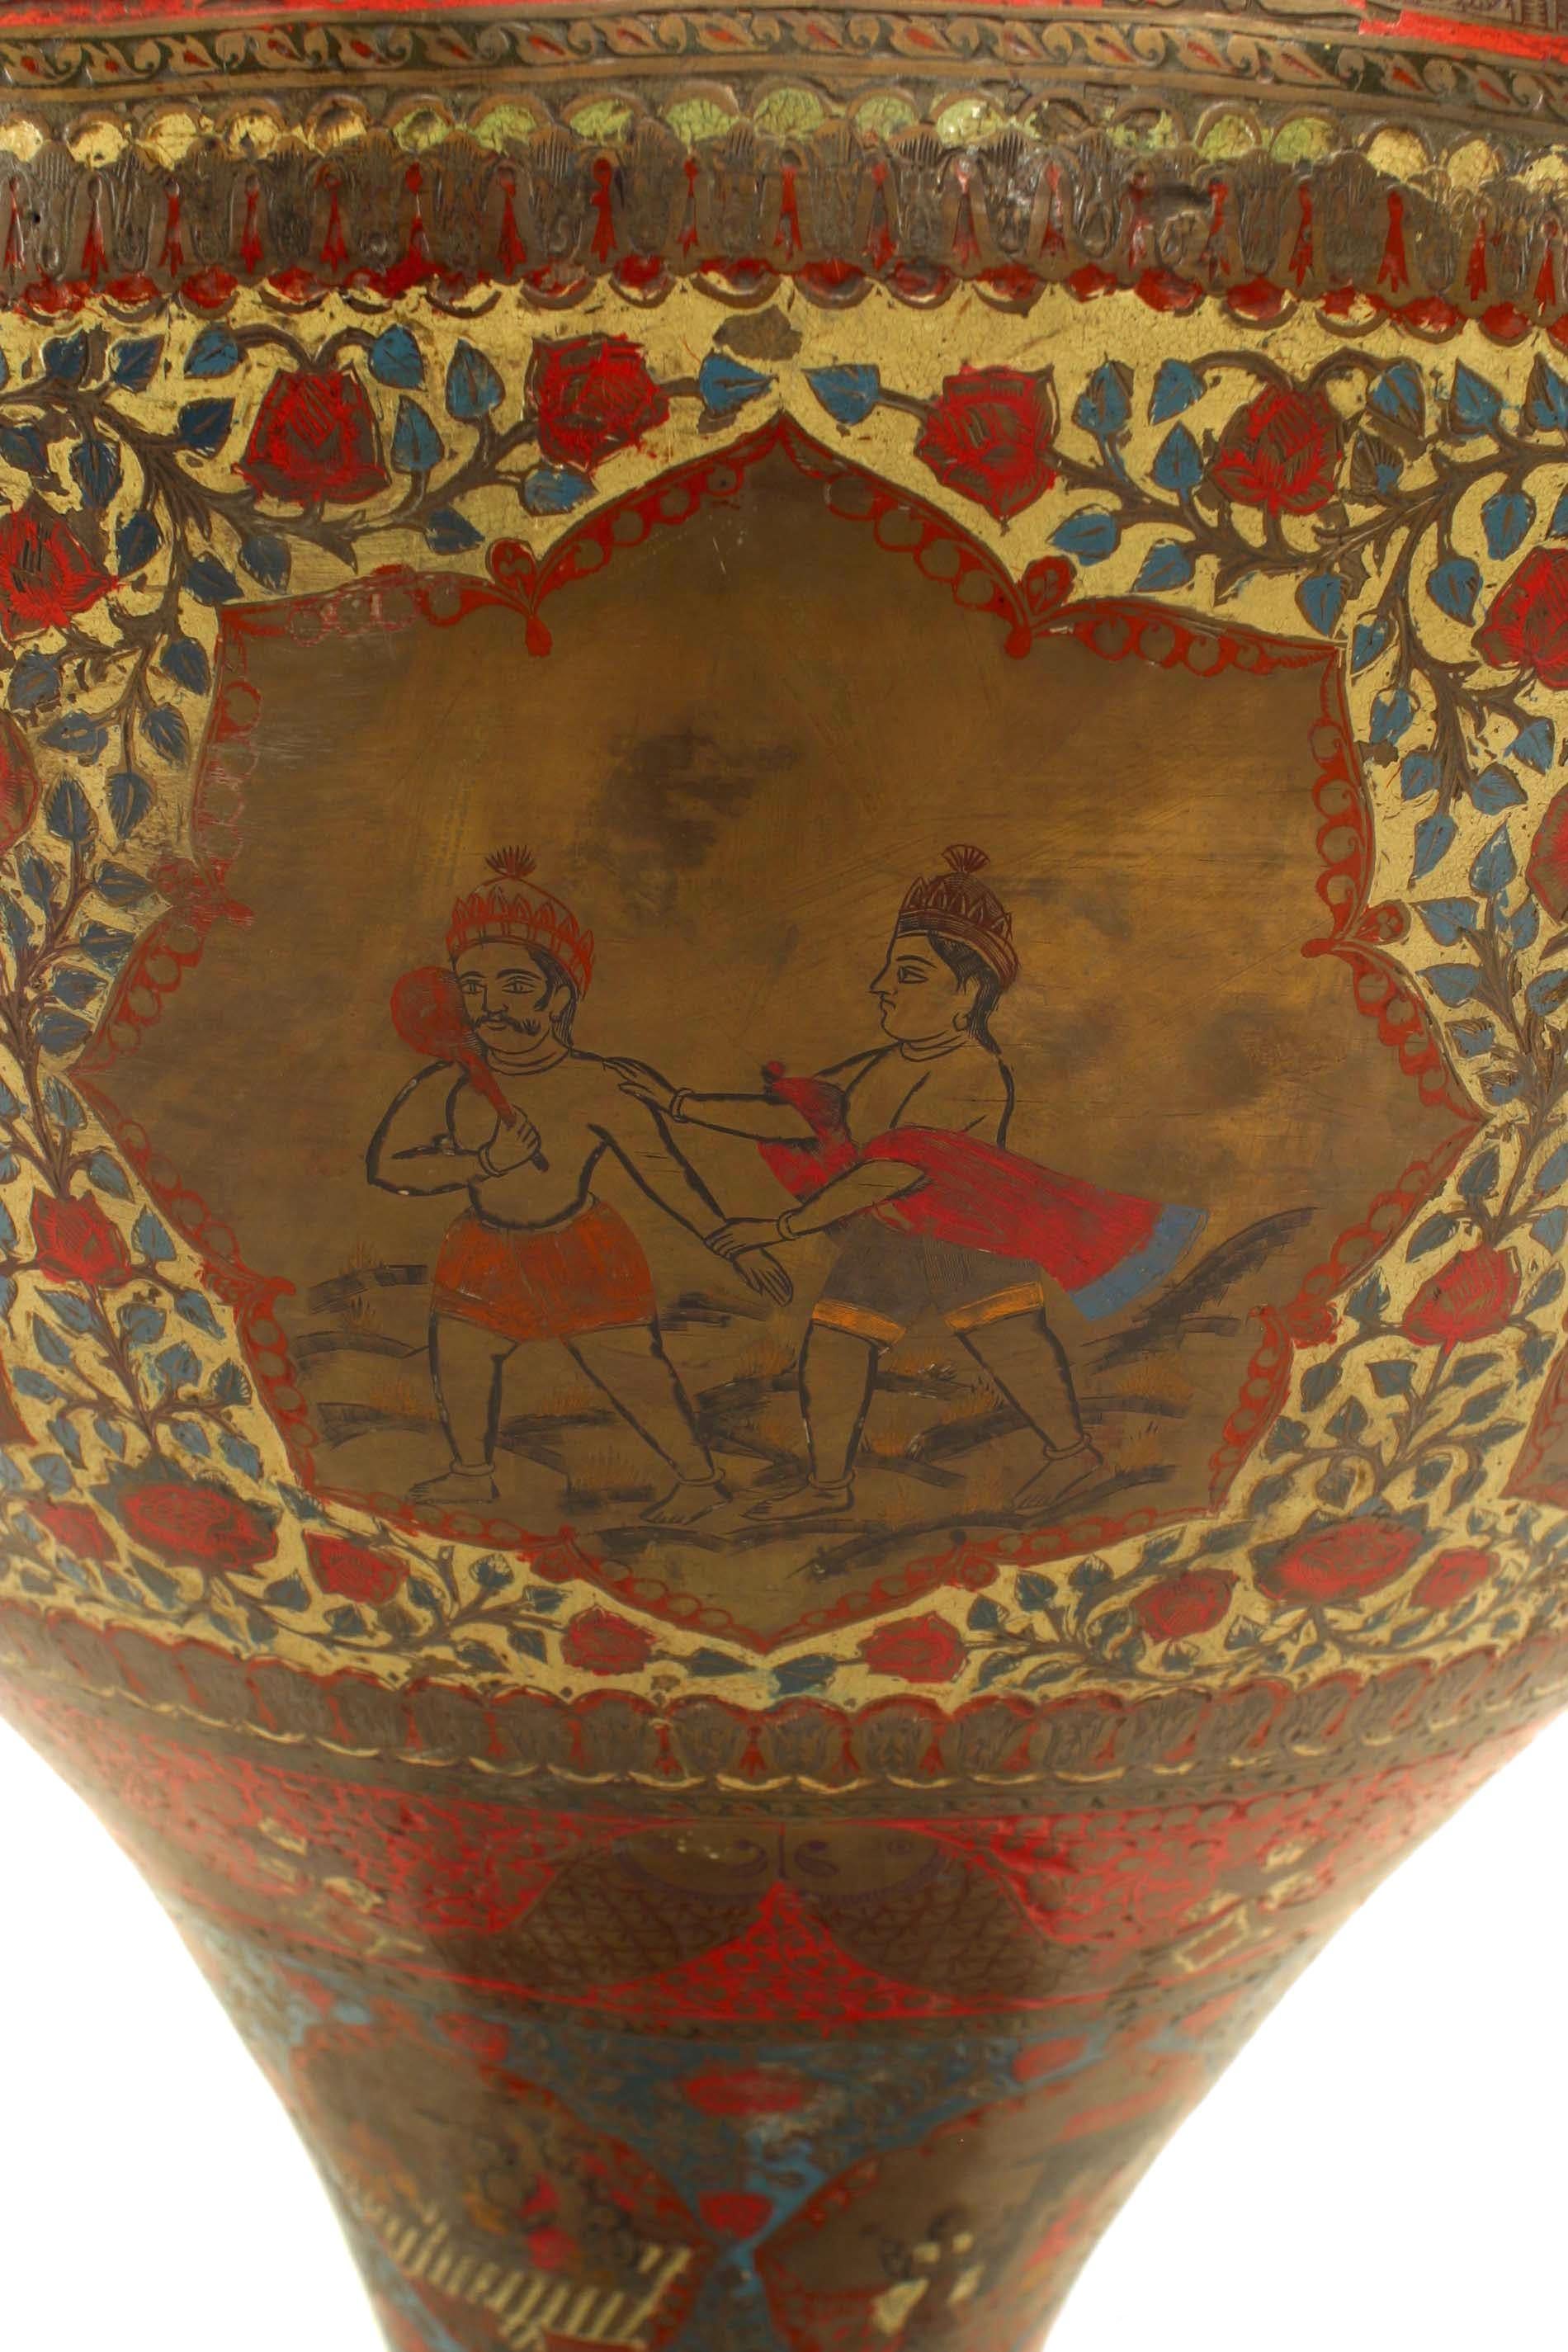 Middle Eastern Moorish style (19/20th Cent) monumental palace vase with red, white, and black enamel decoration (AS IS).
